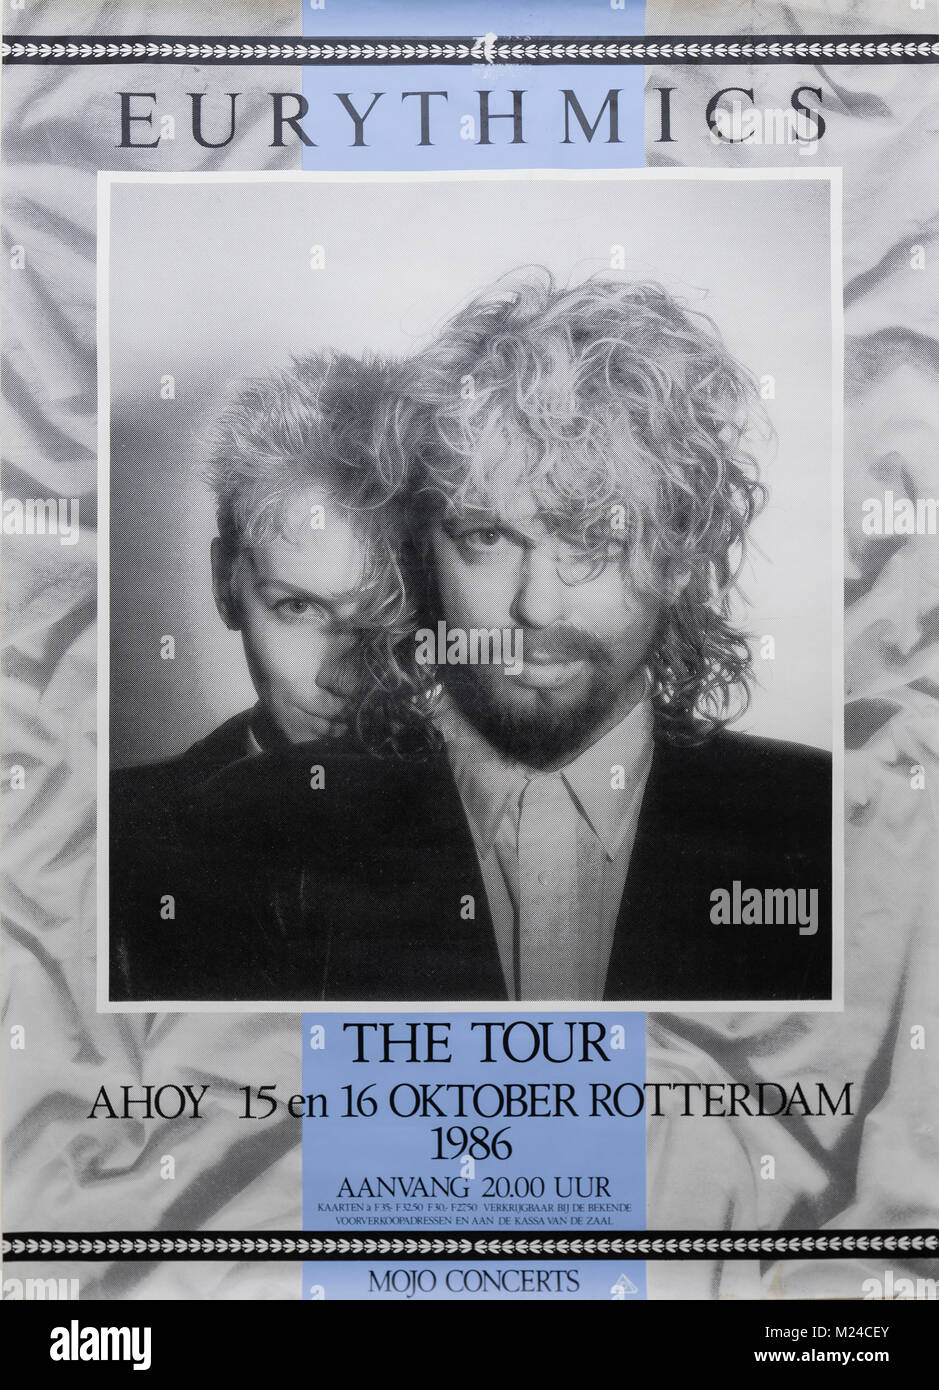 Eurythmics in concert, The Tour, AHOY, Rotterdam, 1986, Musical concert poster Stock Photo